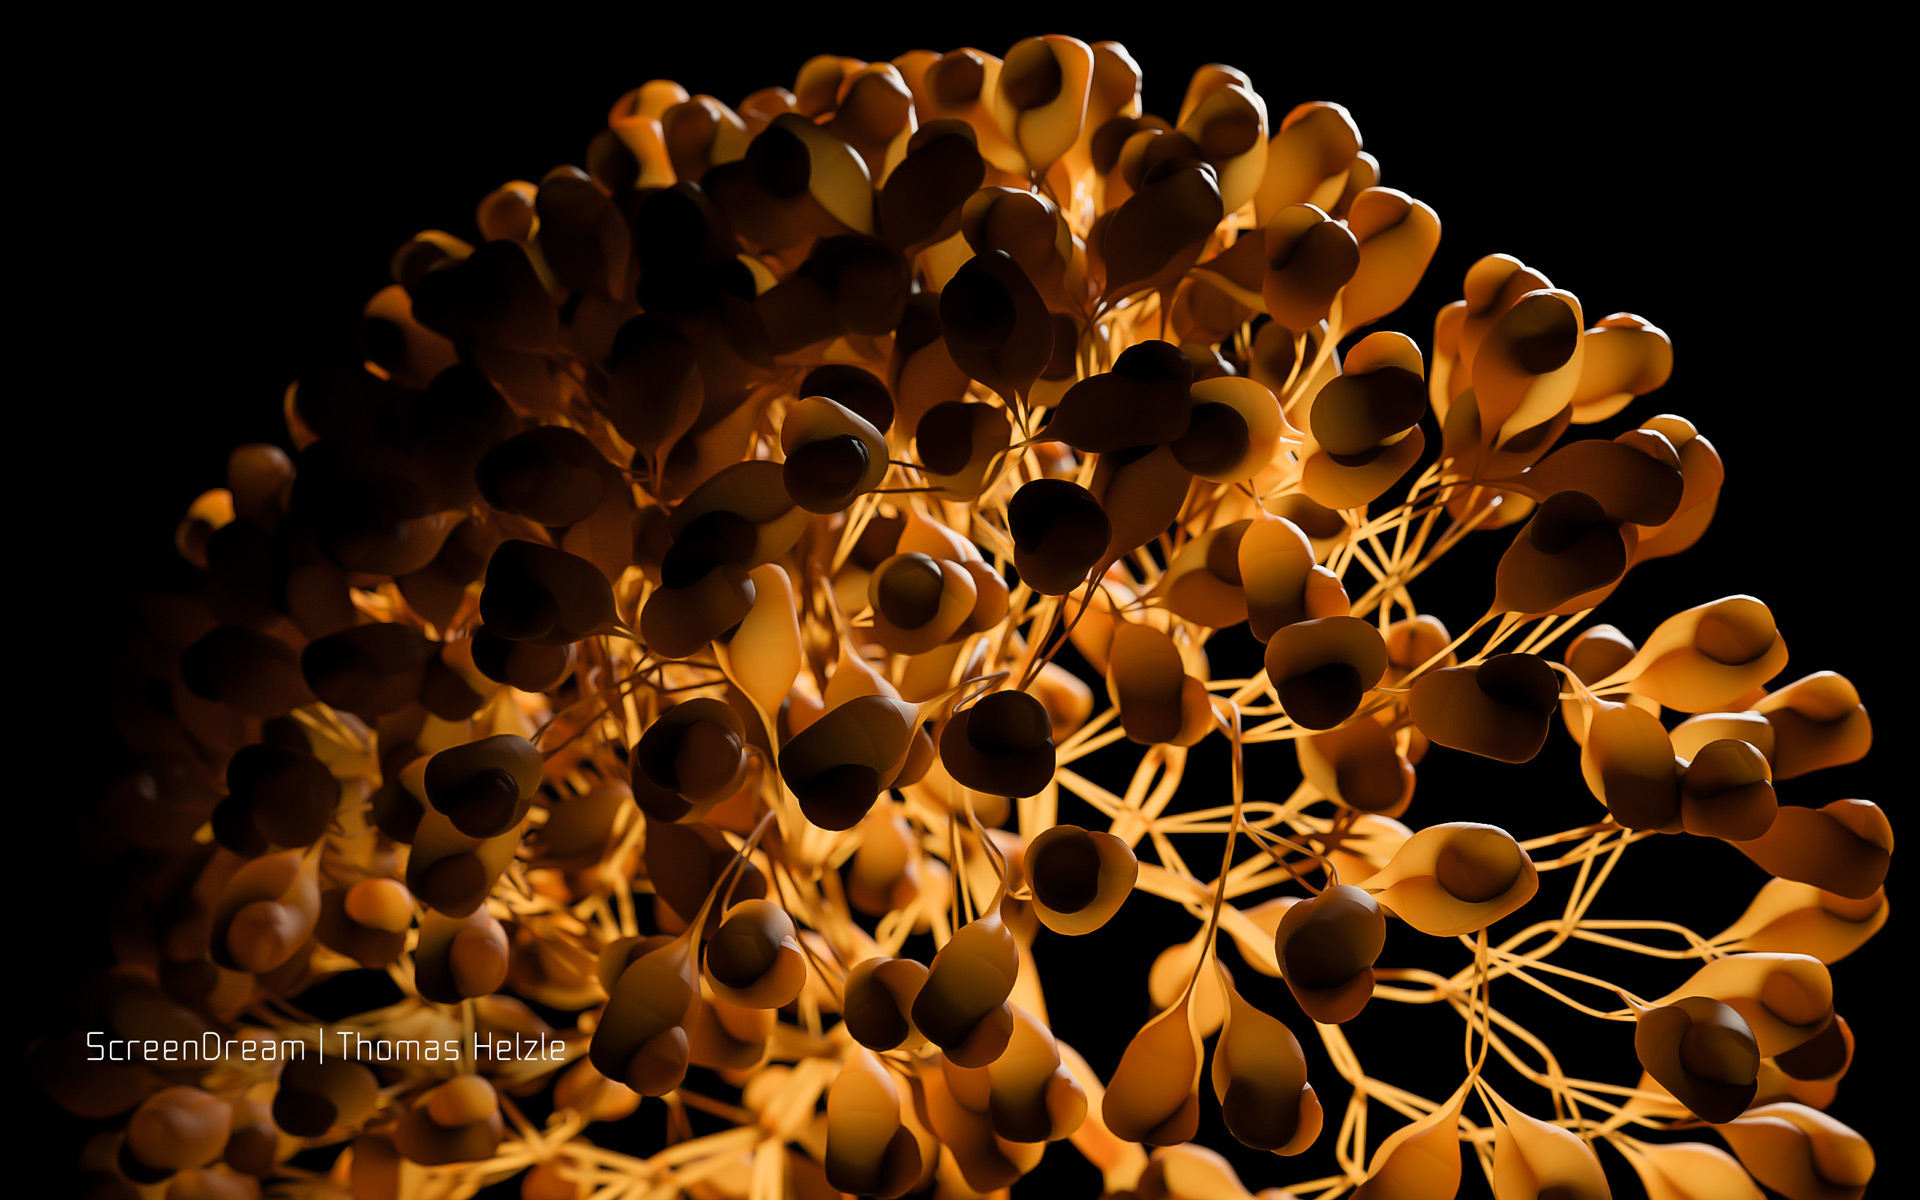 Houdini L-System based plant/seaweed, rendered in Thea Render